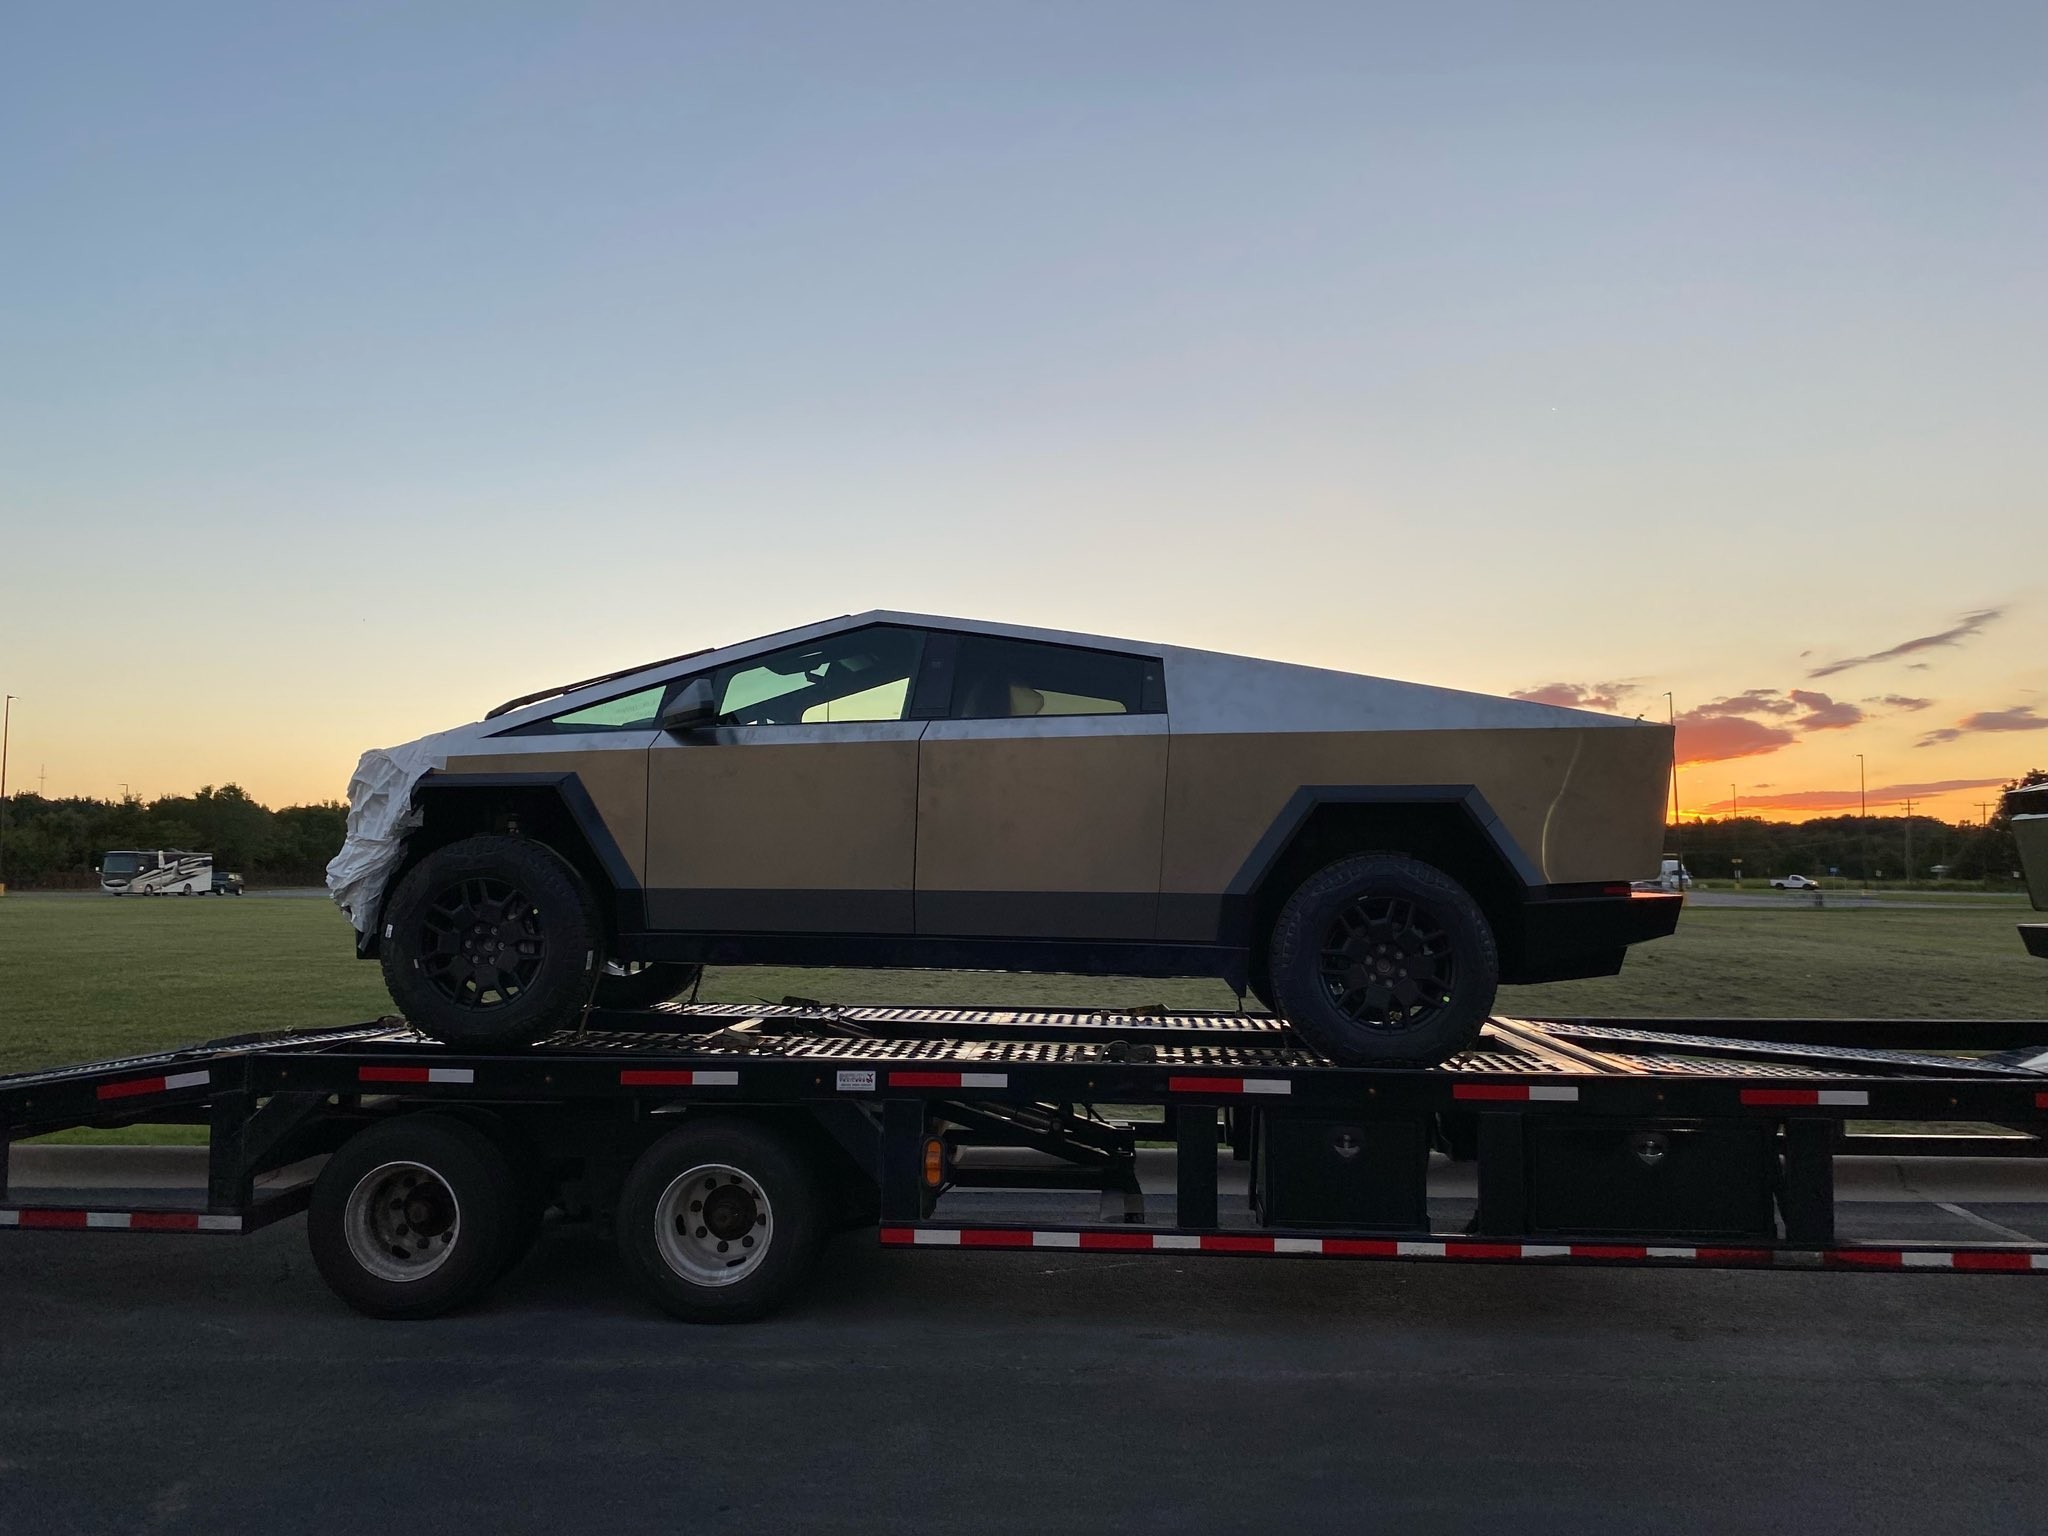 Tesla Cybertruck Spotted in Arkansas With a 